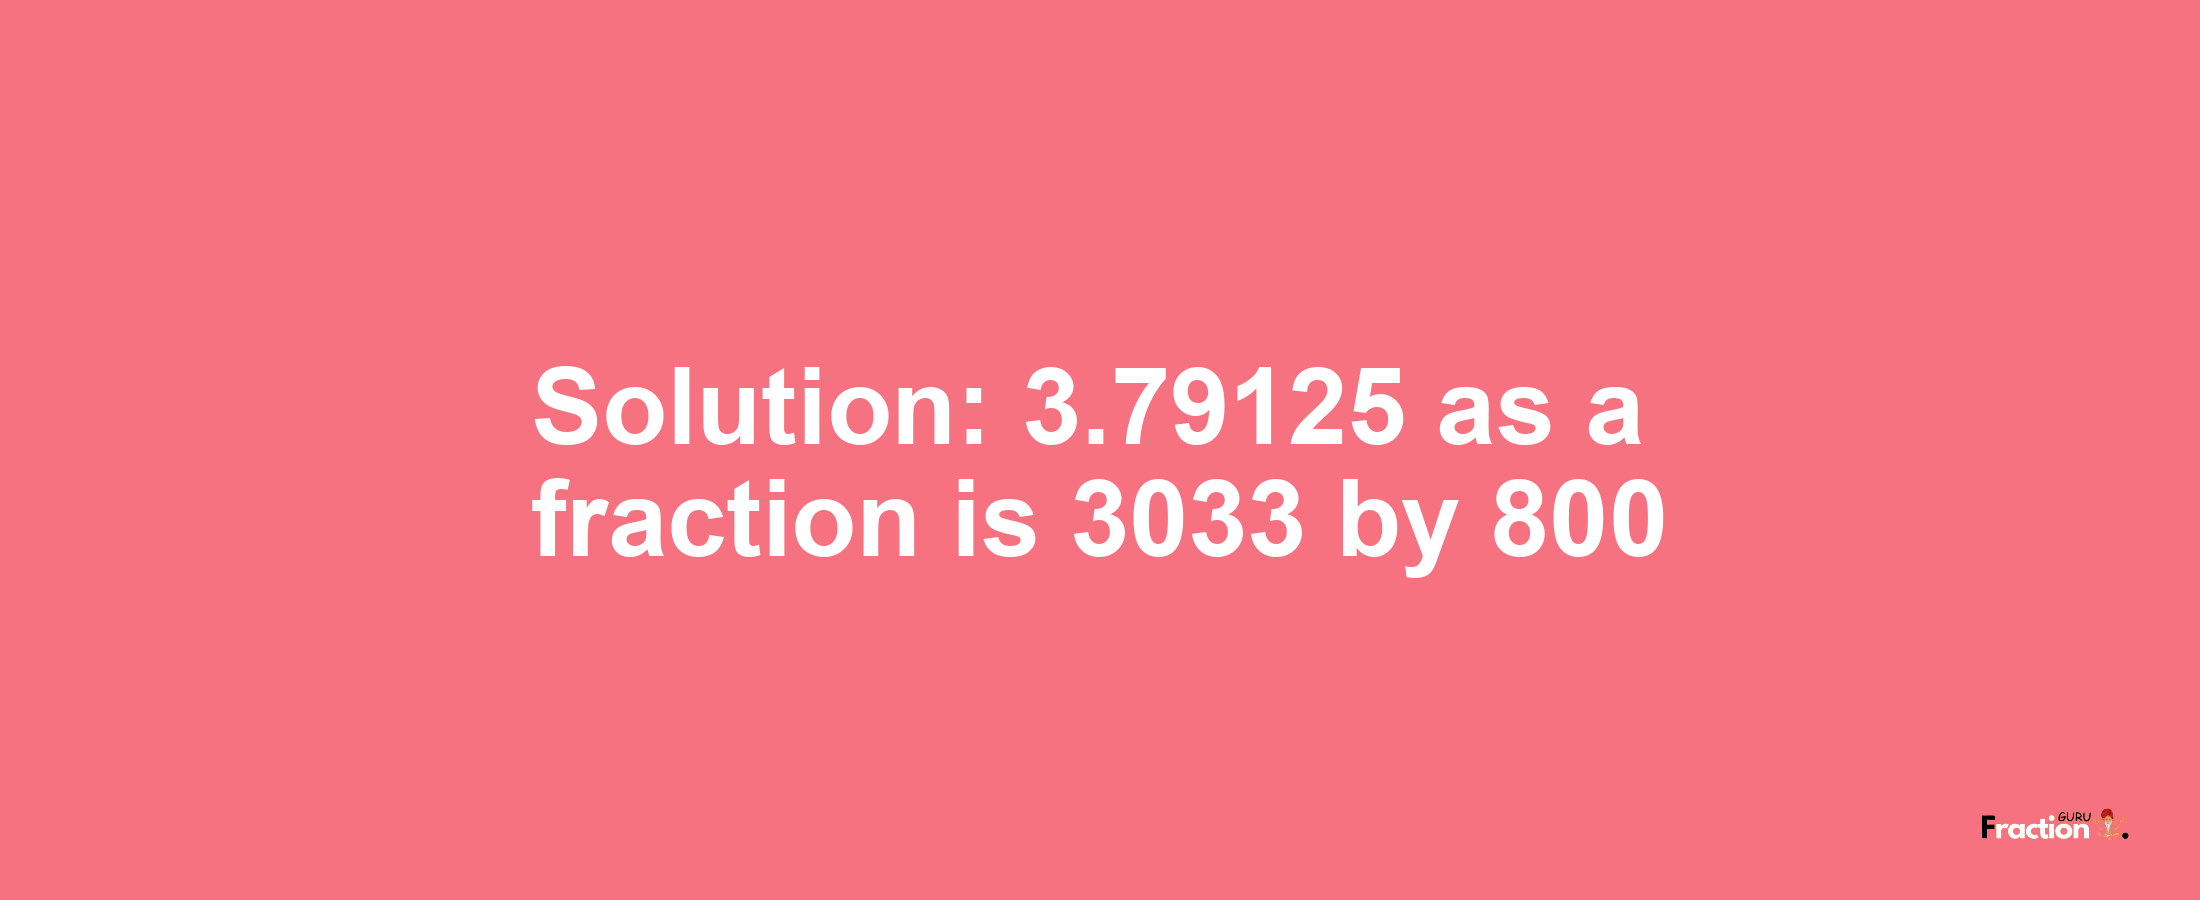 Solution:3.79125 as a fraction is 3033/800